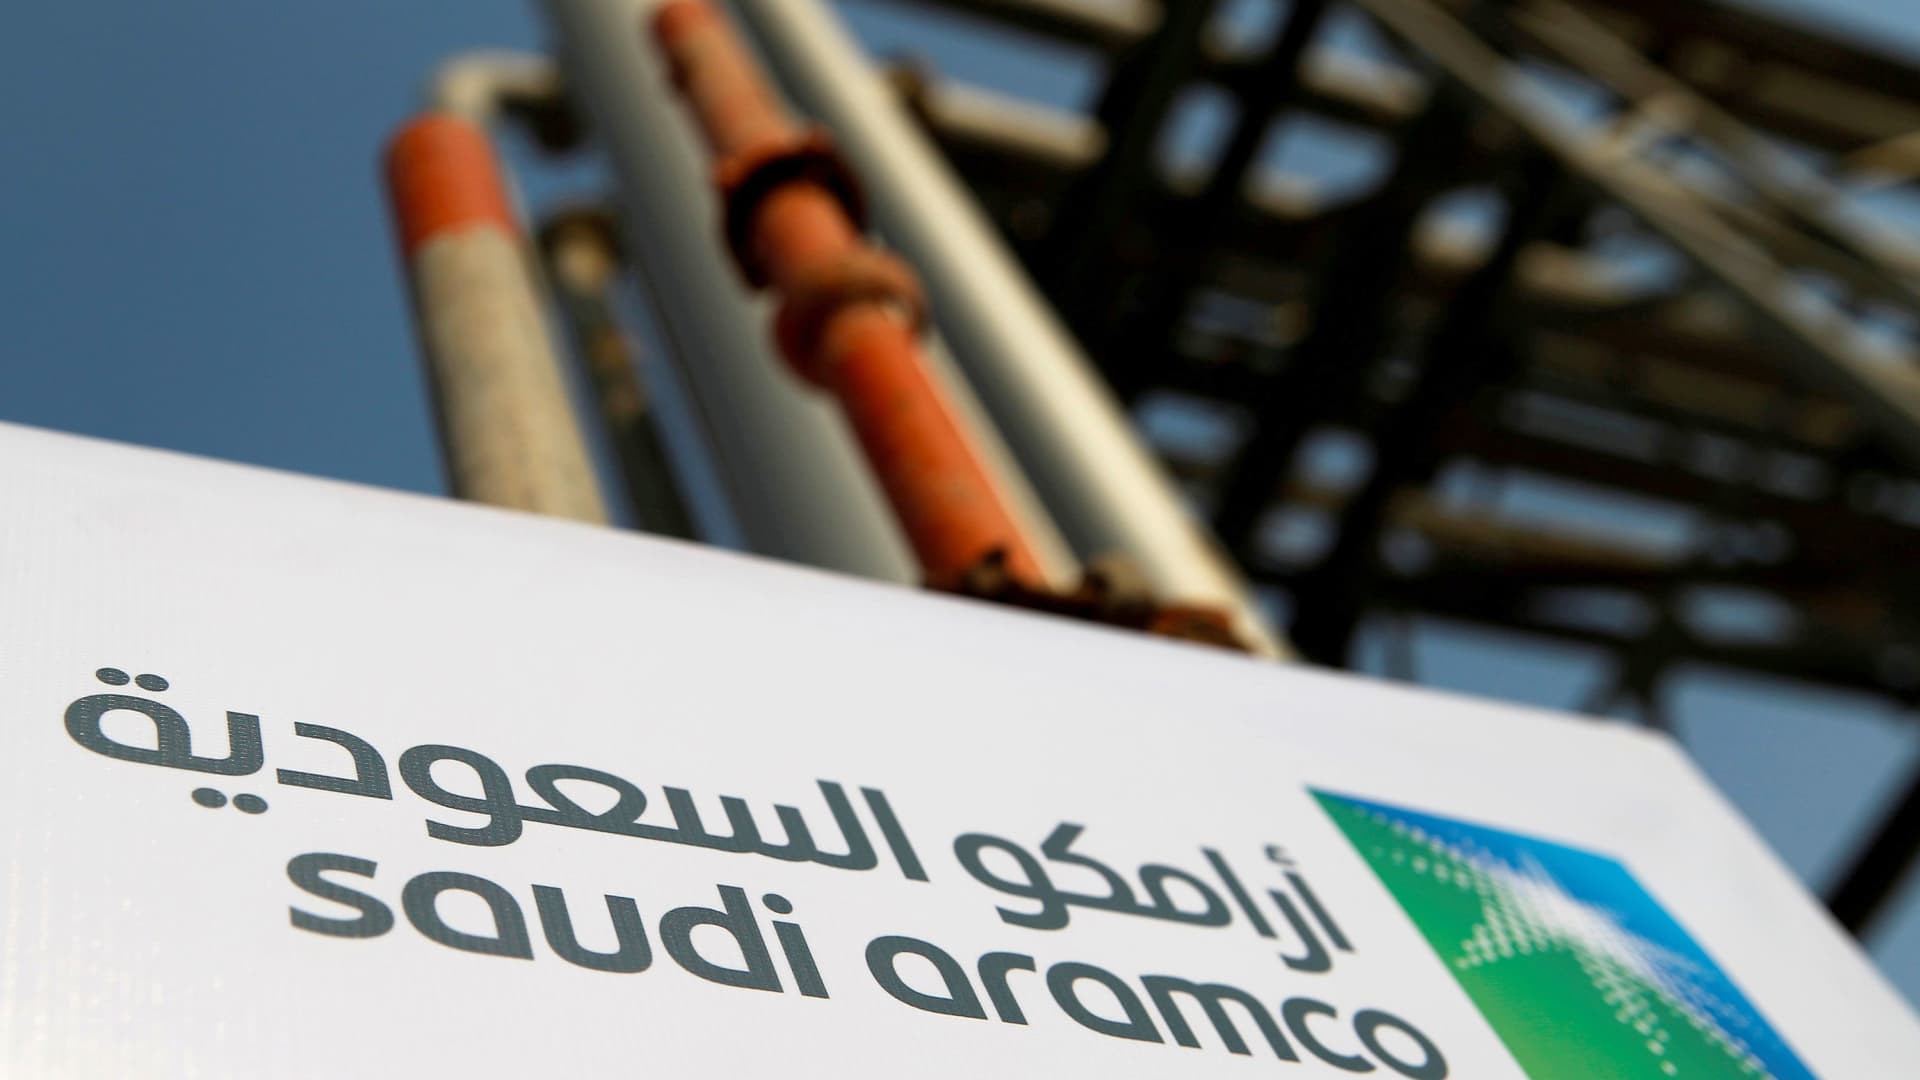 Saudi oil giant Aramco announces pilot project to suck CO2 out of the air, but some scientists are skeptical